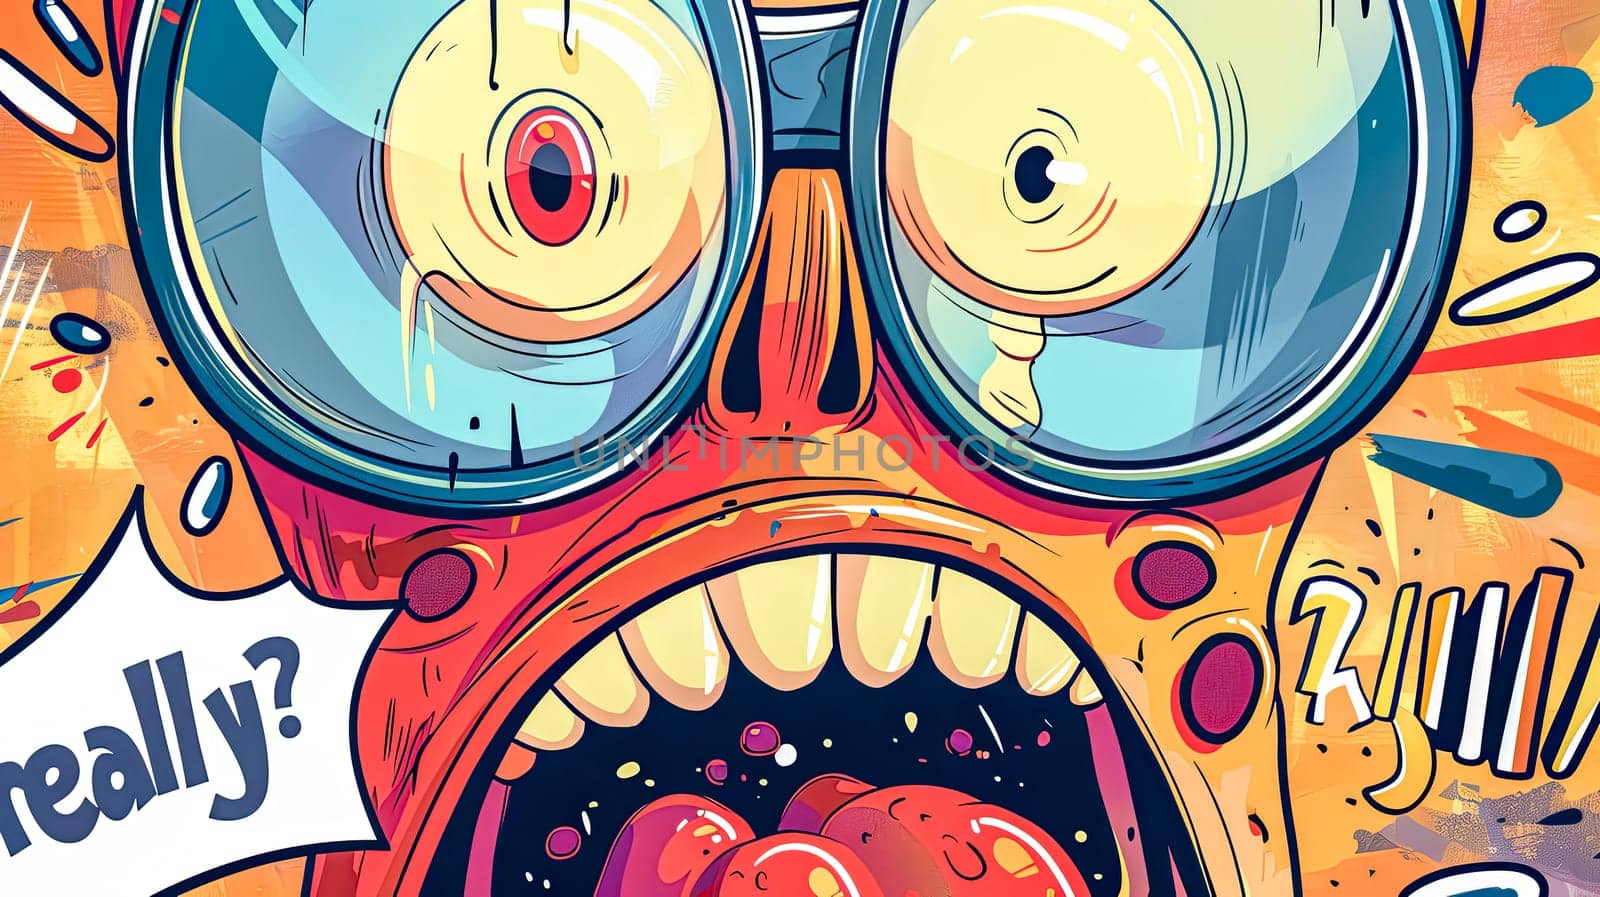 Vibrant cartoon image depicting a surprised character saying 'really?' by Edophoto